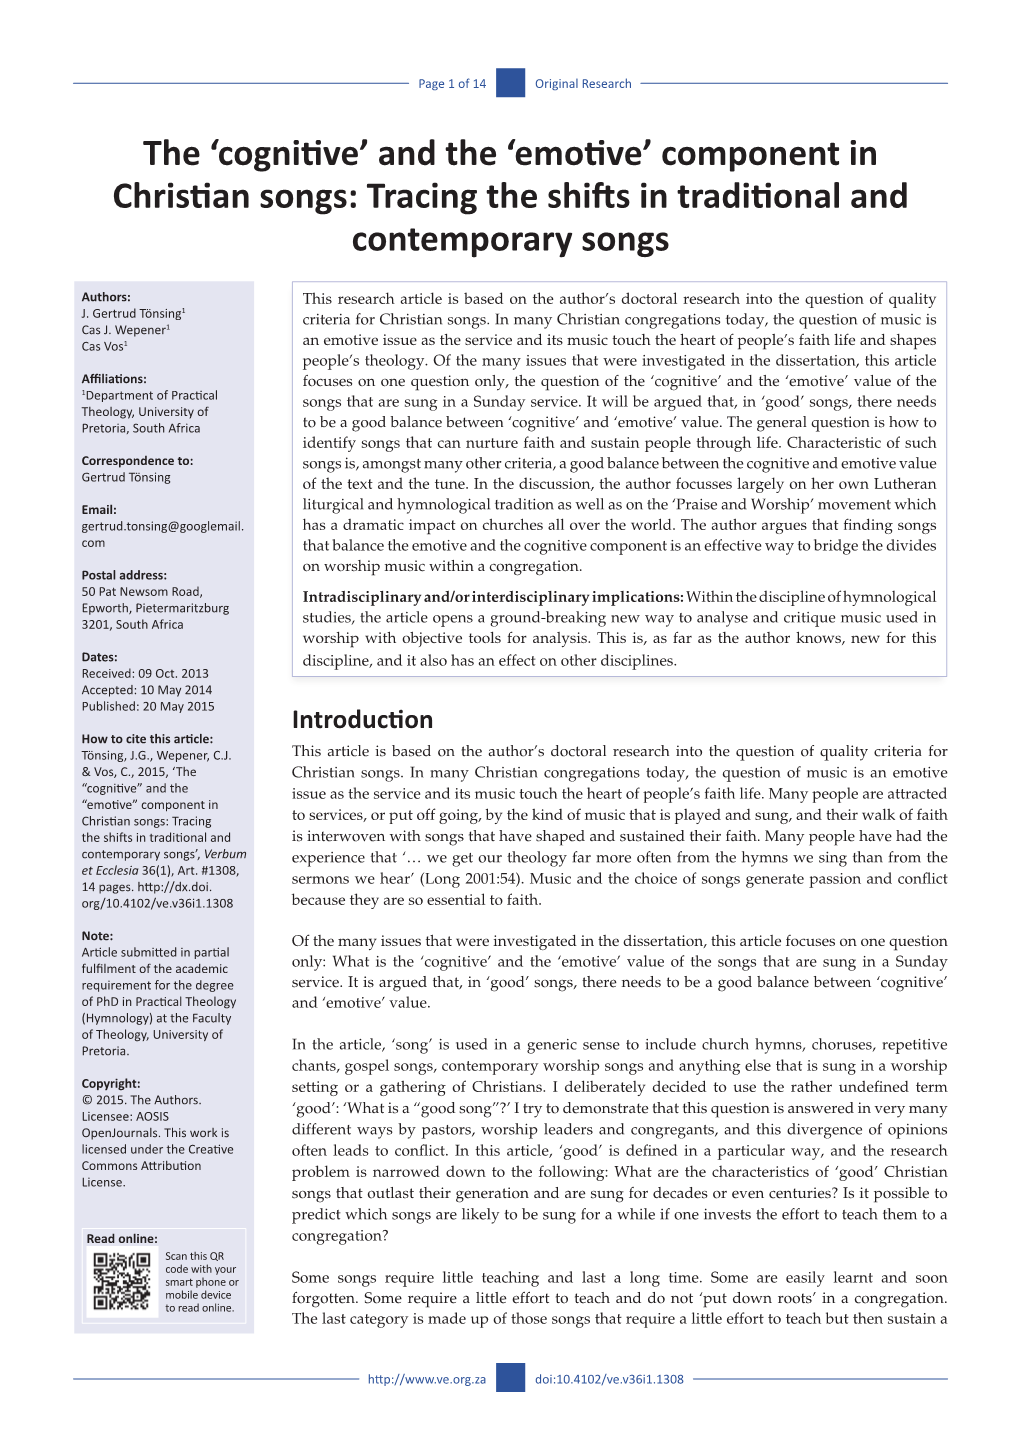 Component in Christian Songs: Tracing the Shifts in Traditional and Contemporary Songs